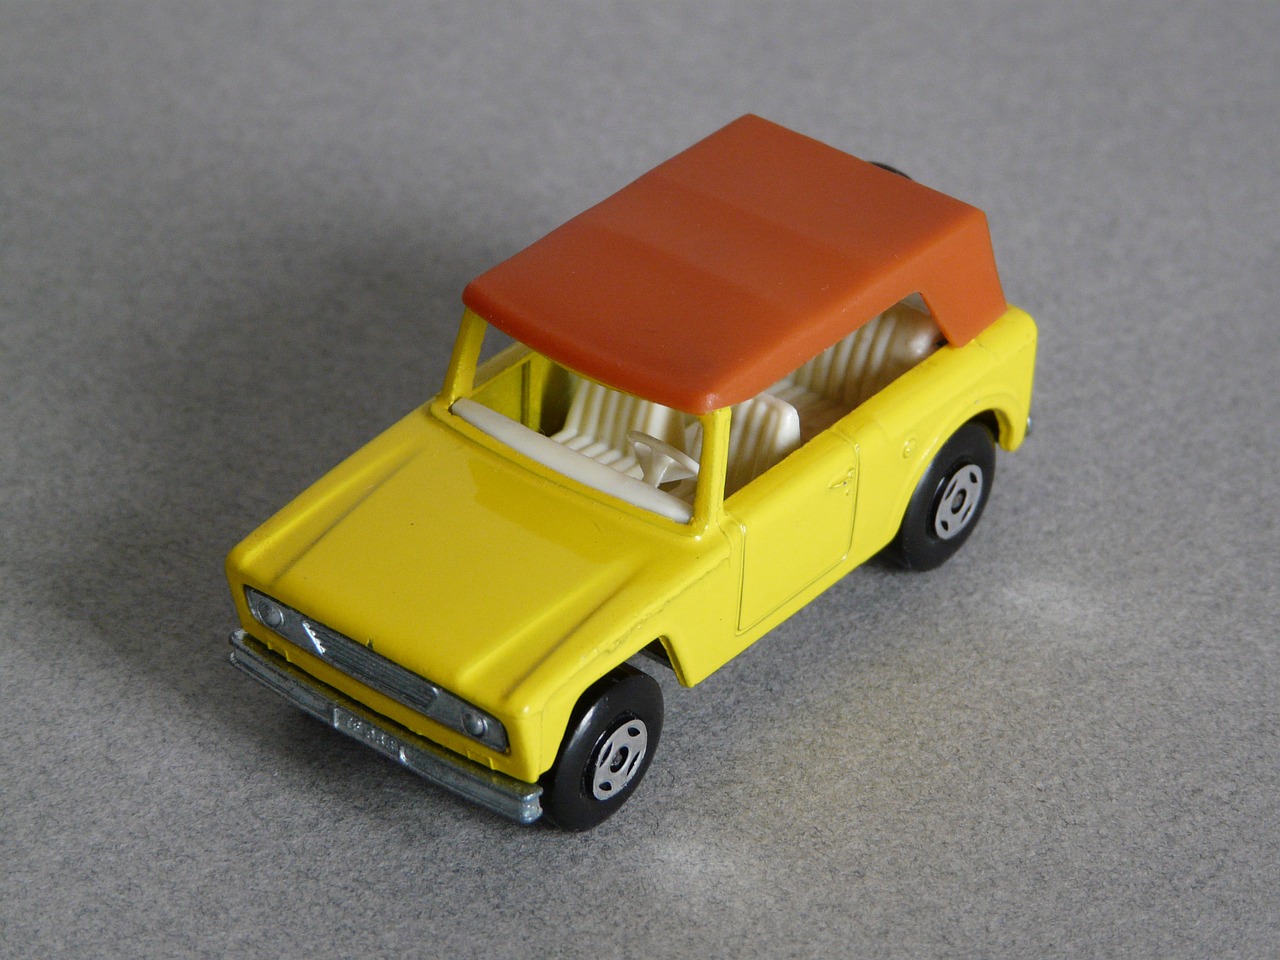 toy small cars scale models free photo